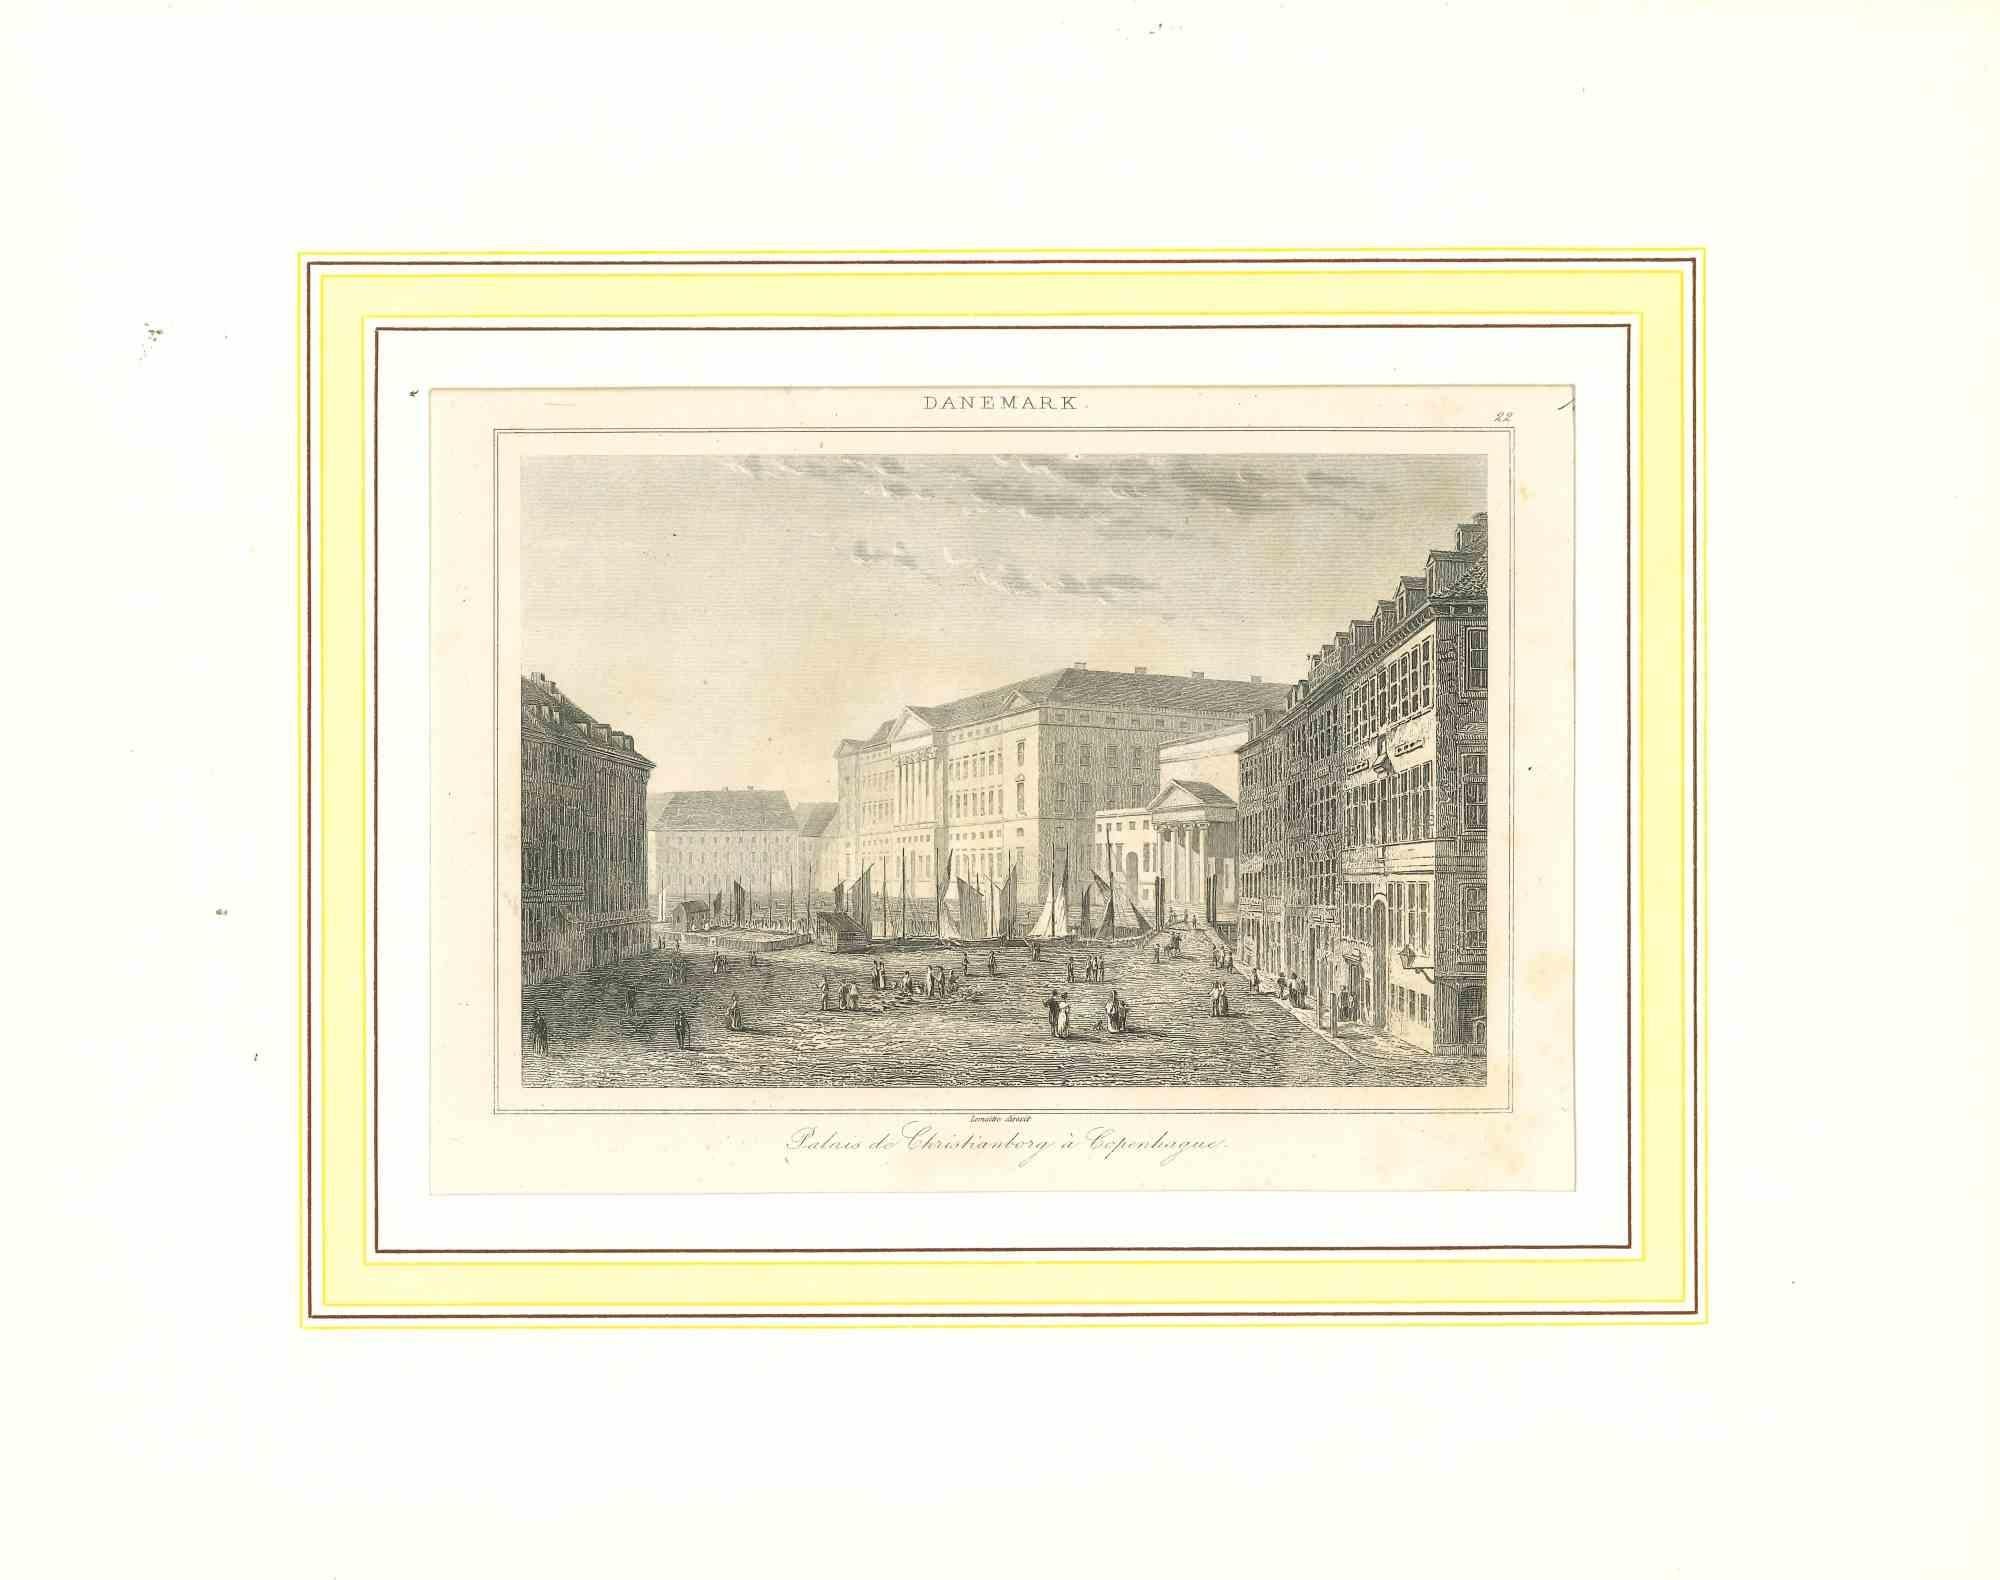 Ancient View of Palais de Christianborg - Original Lithograph-Early 19th Century